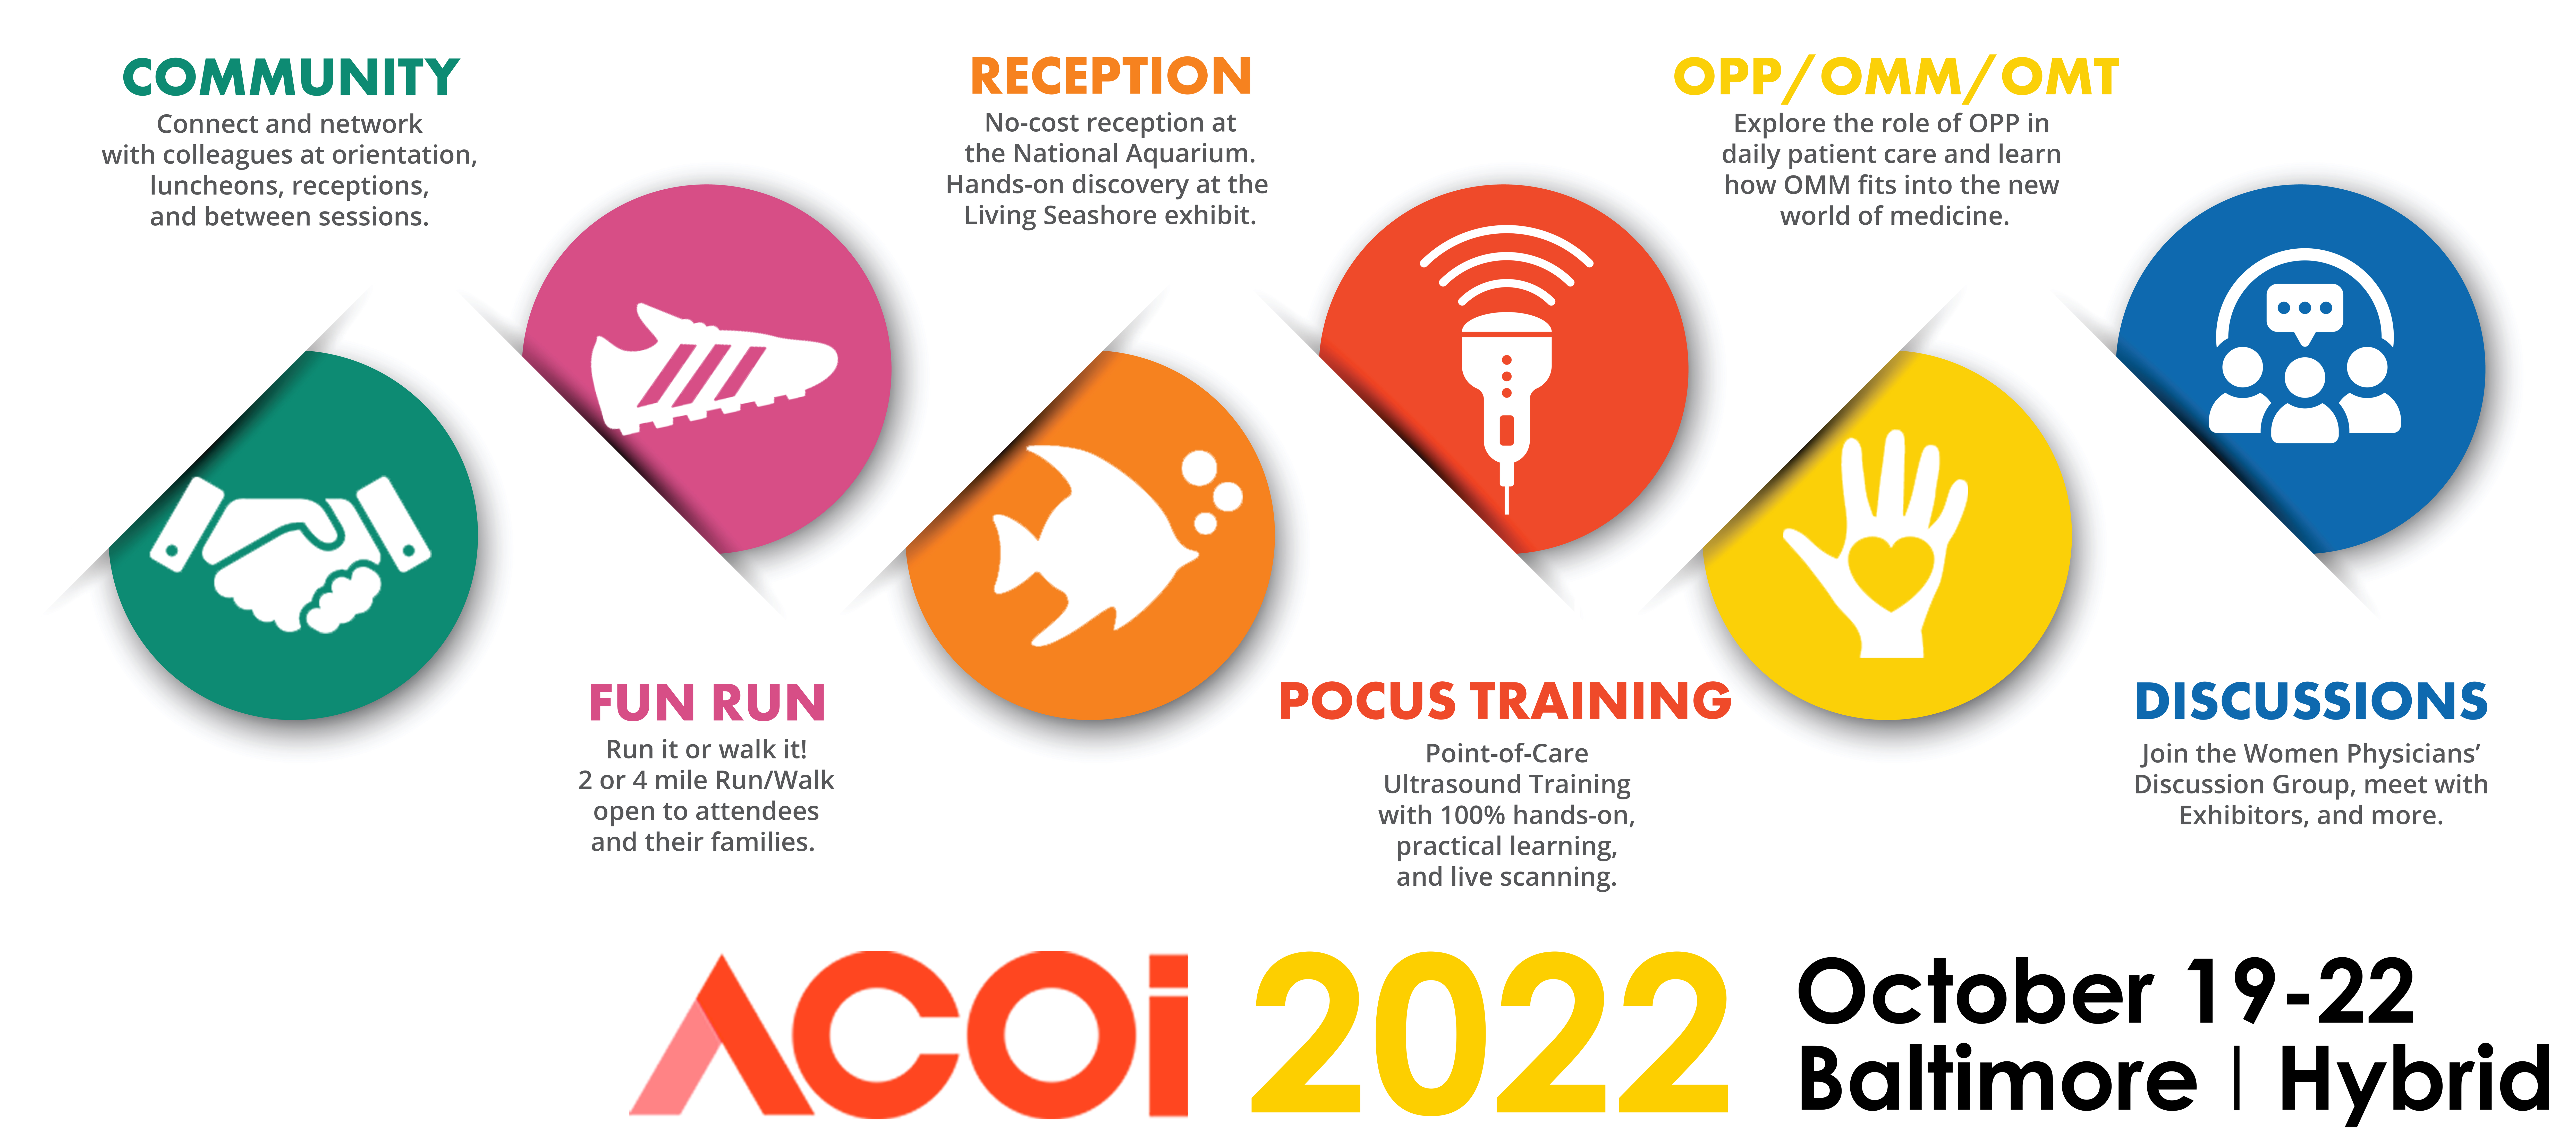 2022 ACOI Annual Convention and Scientific Sessions